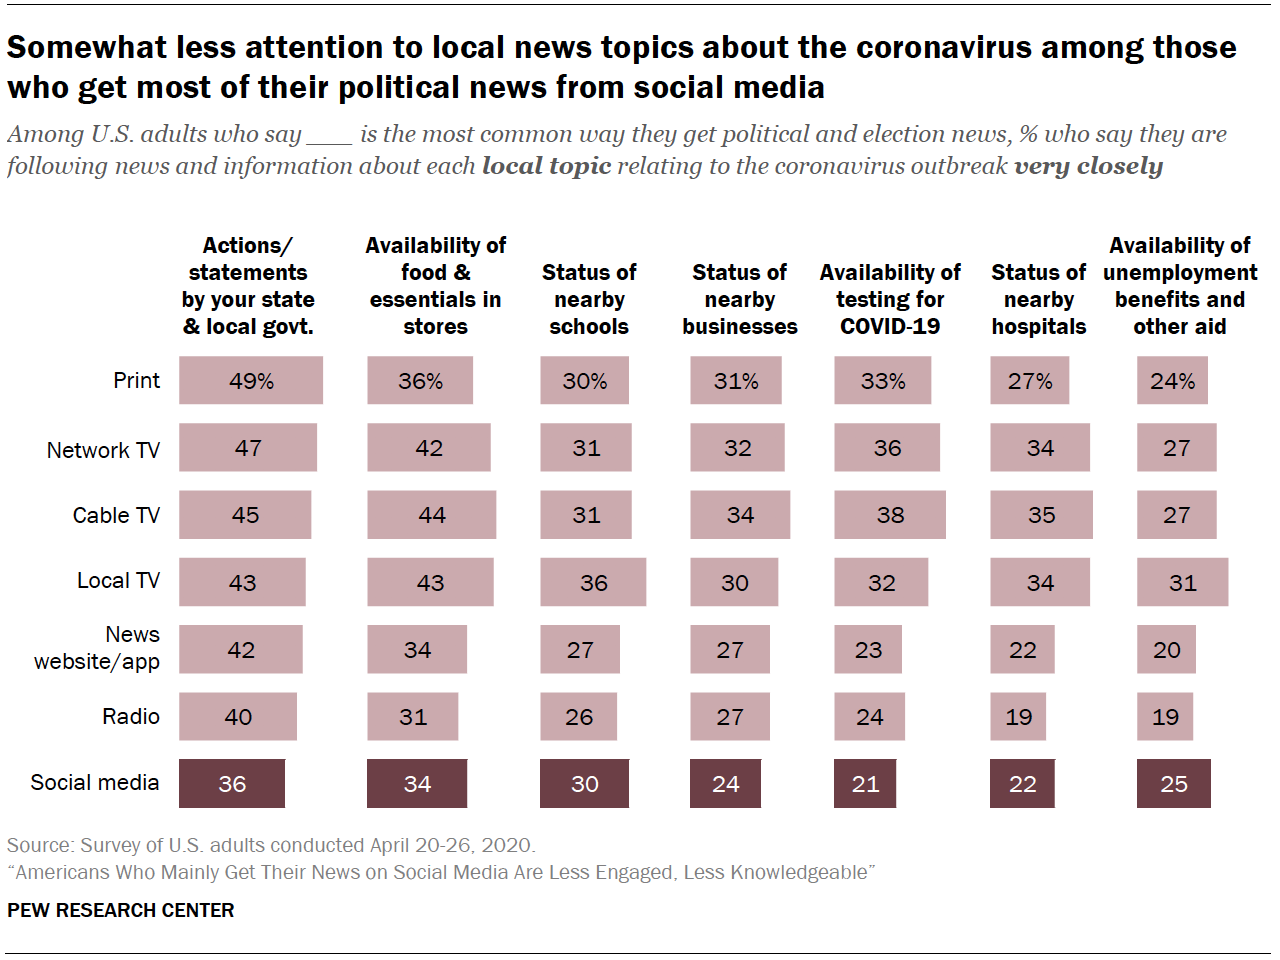 Chart shows somewhat less attention to local news topics about the coronavirus among those who get most of their political news from social media